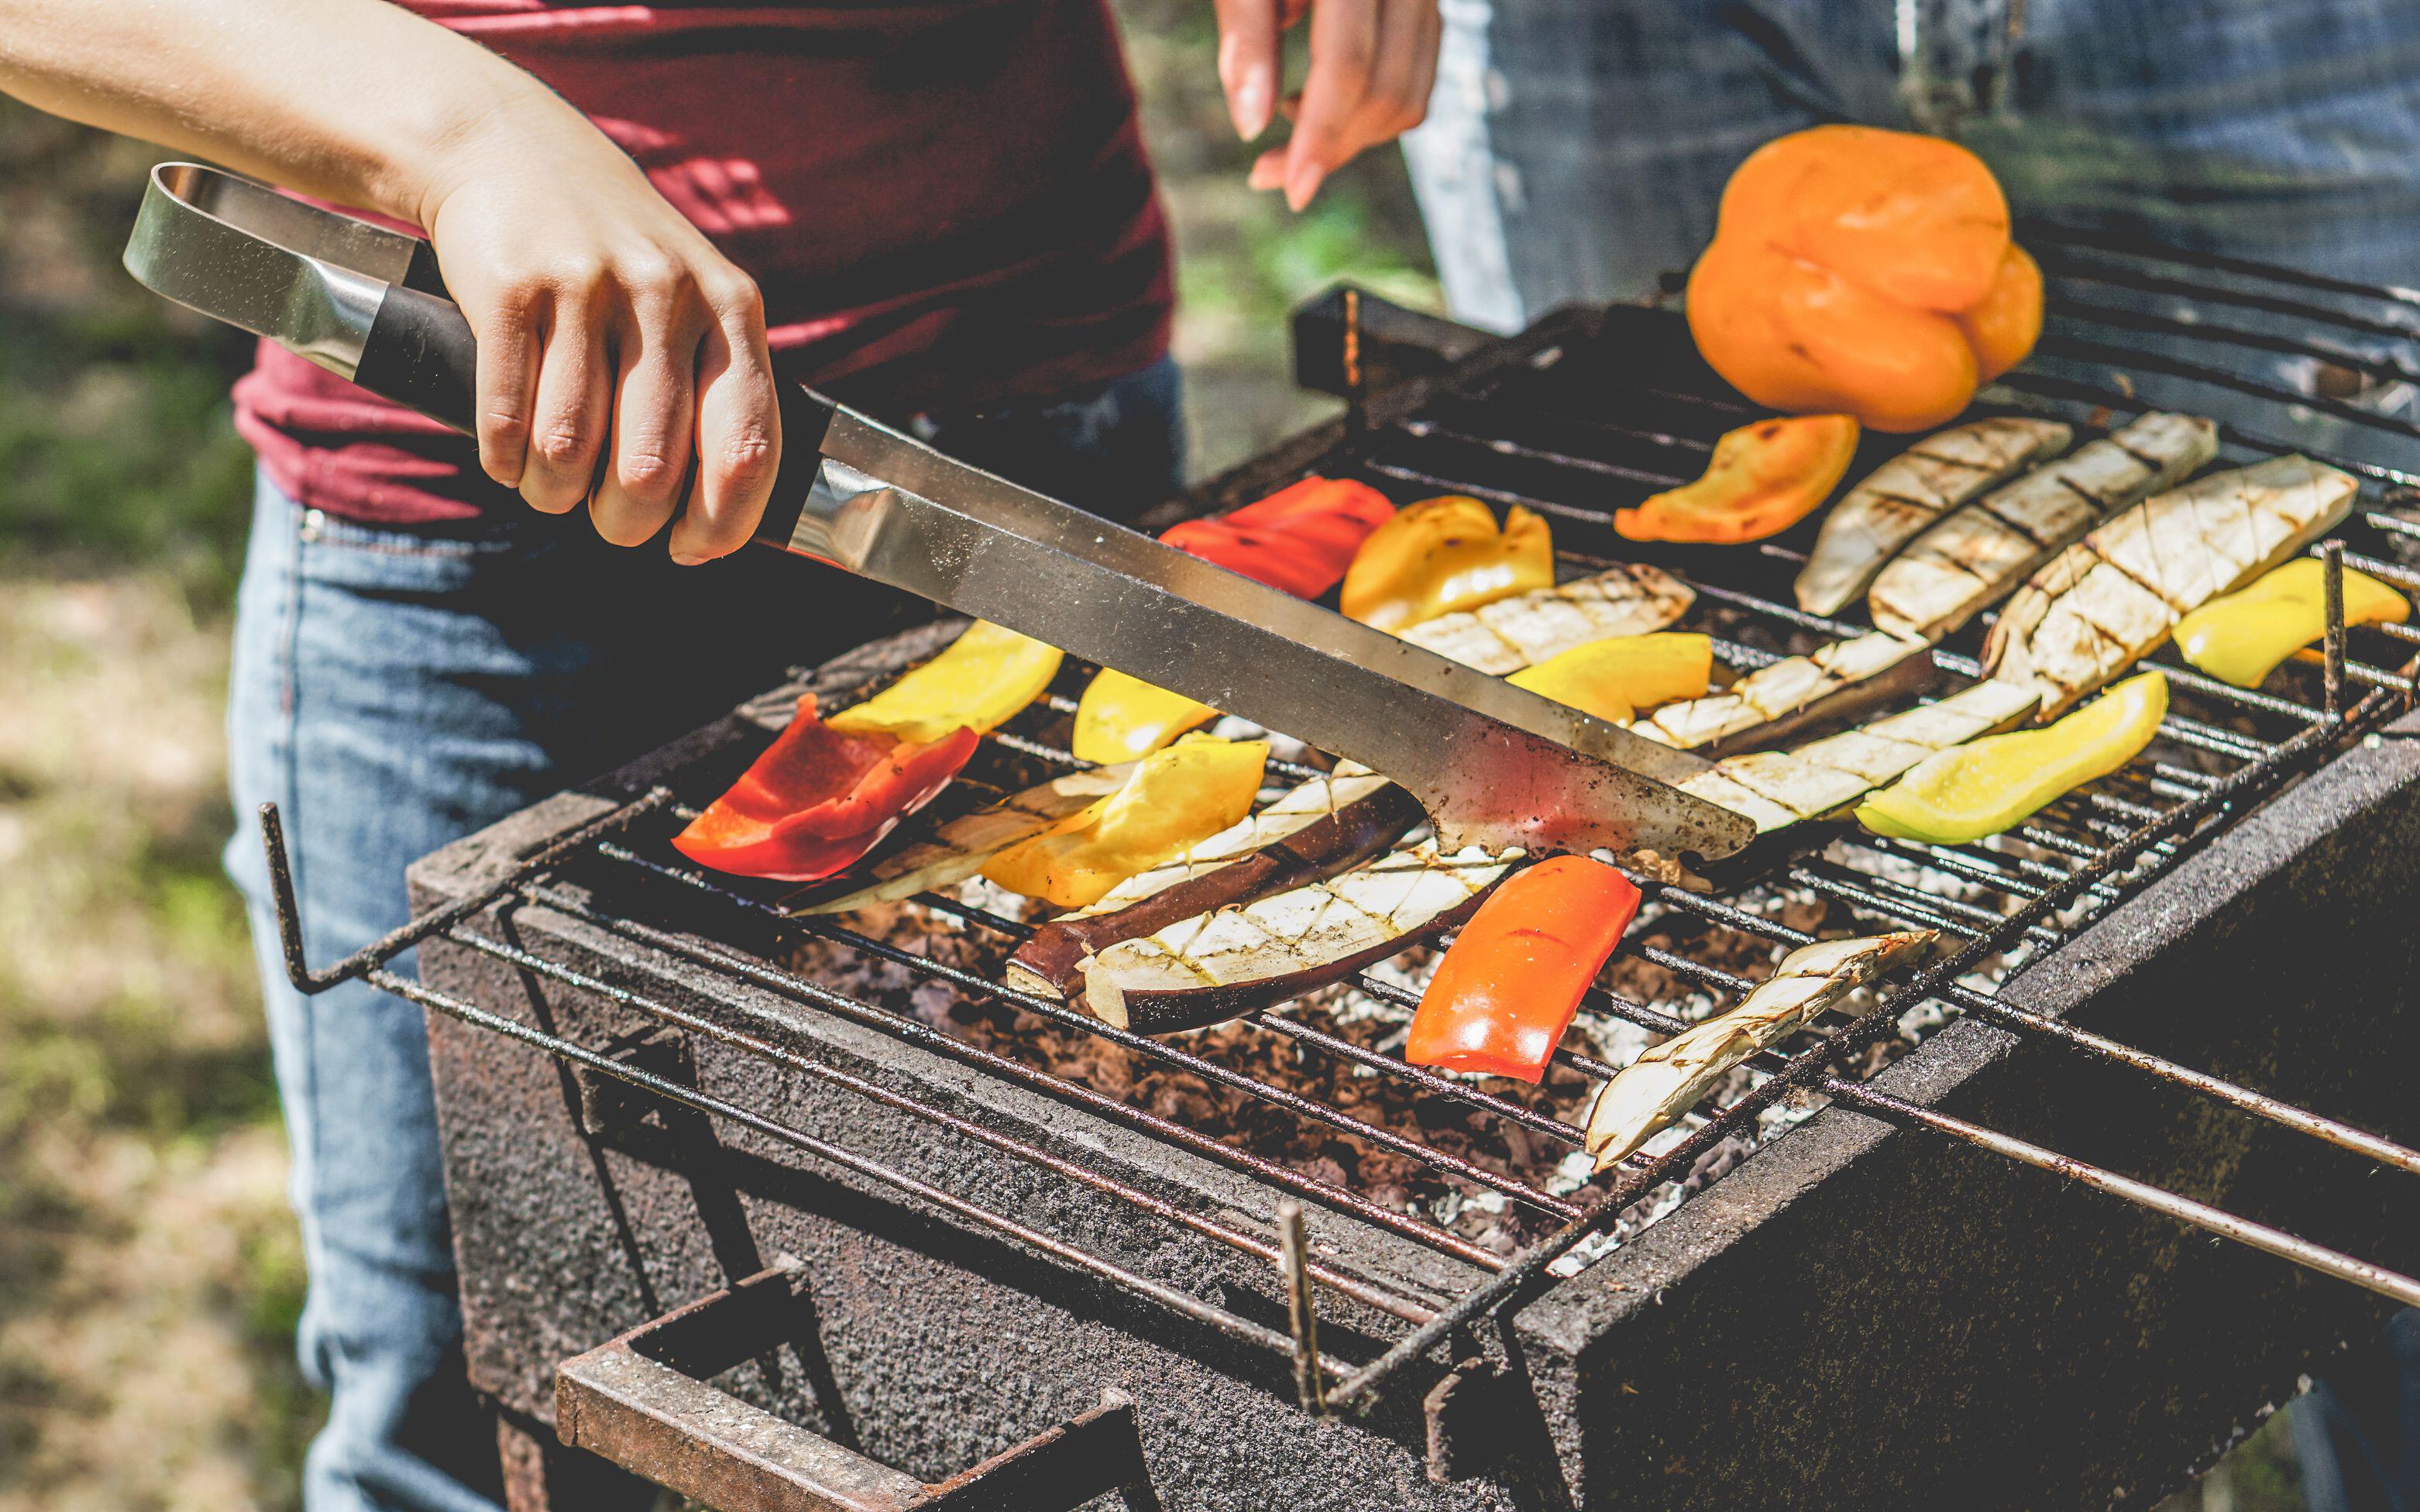 The unpredictability of the BBQ can be daunting to the unprepared home cook